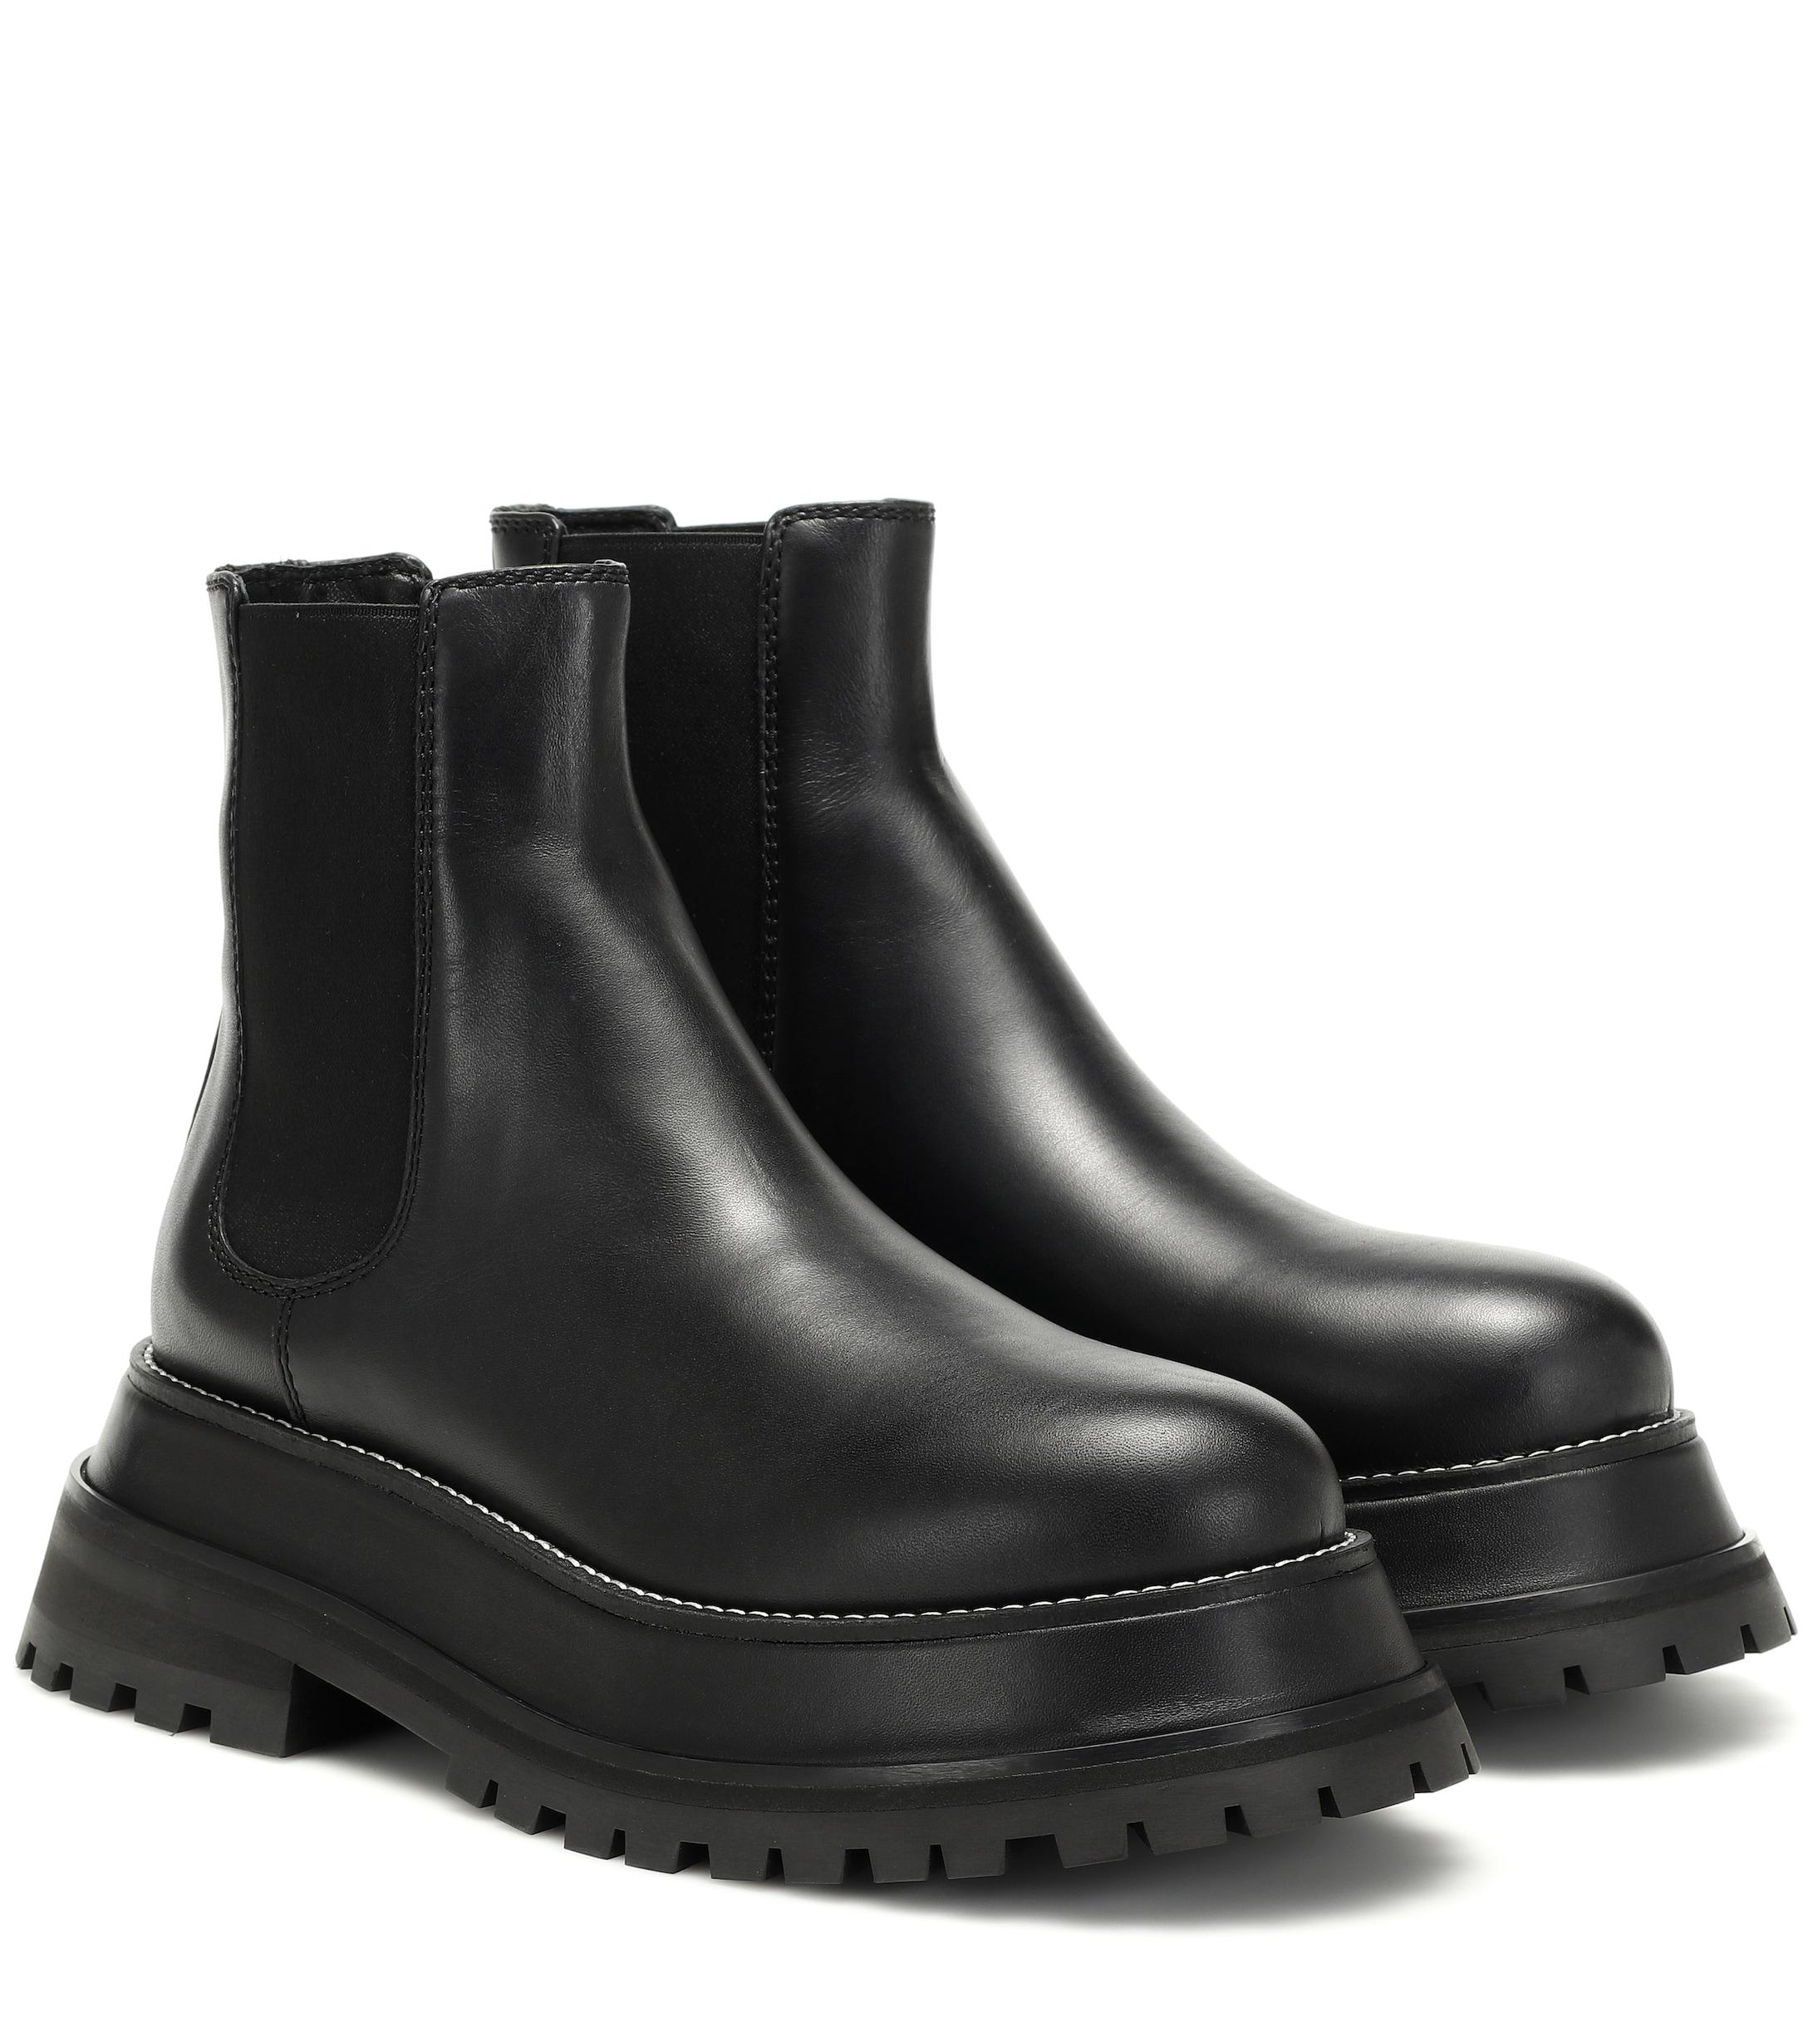 Burberry Leather Ankle Boots in Black - Lyst